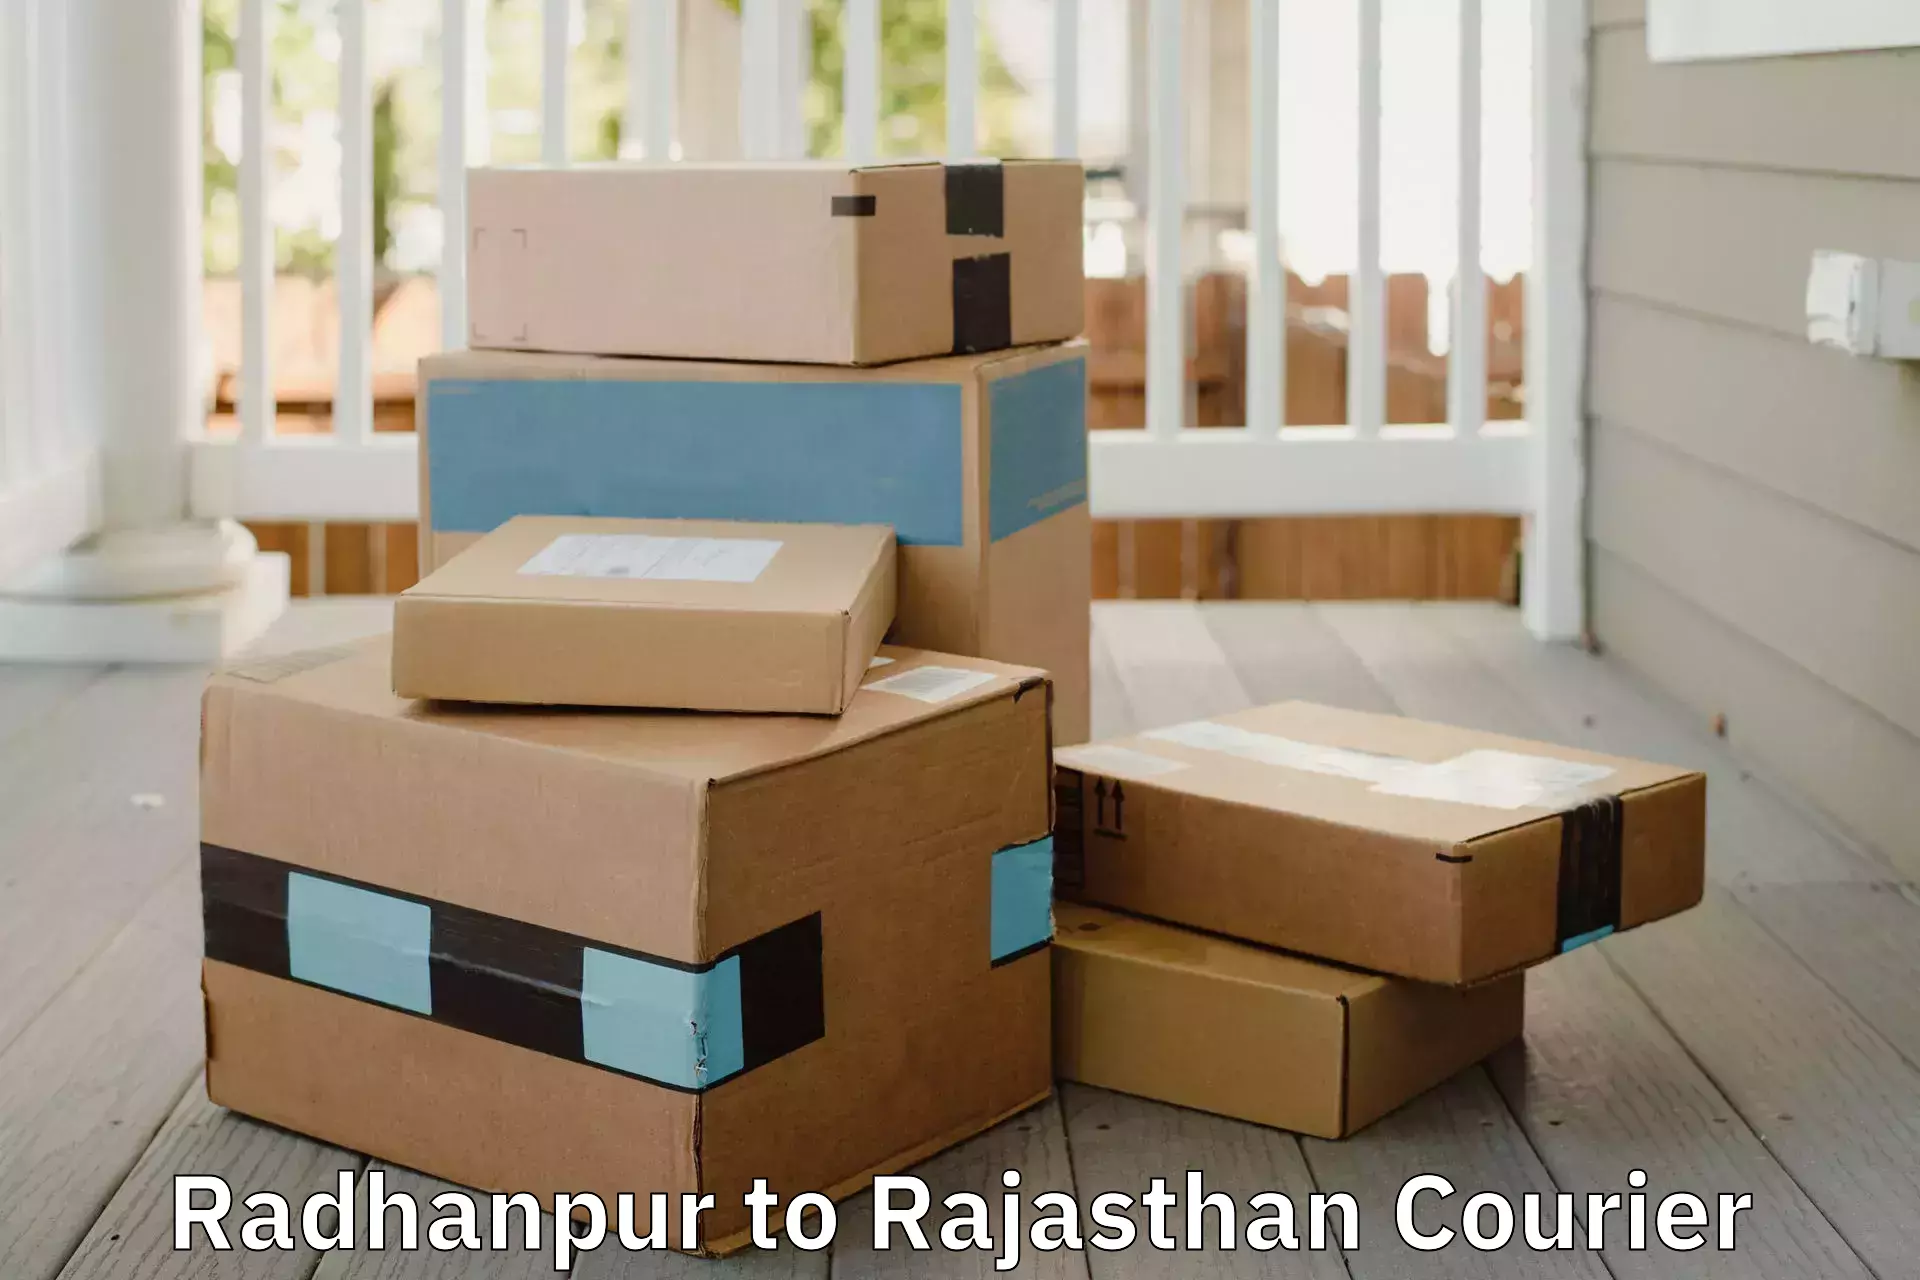 Specialized moving company Radhanpur to Sawai Madhopur